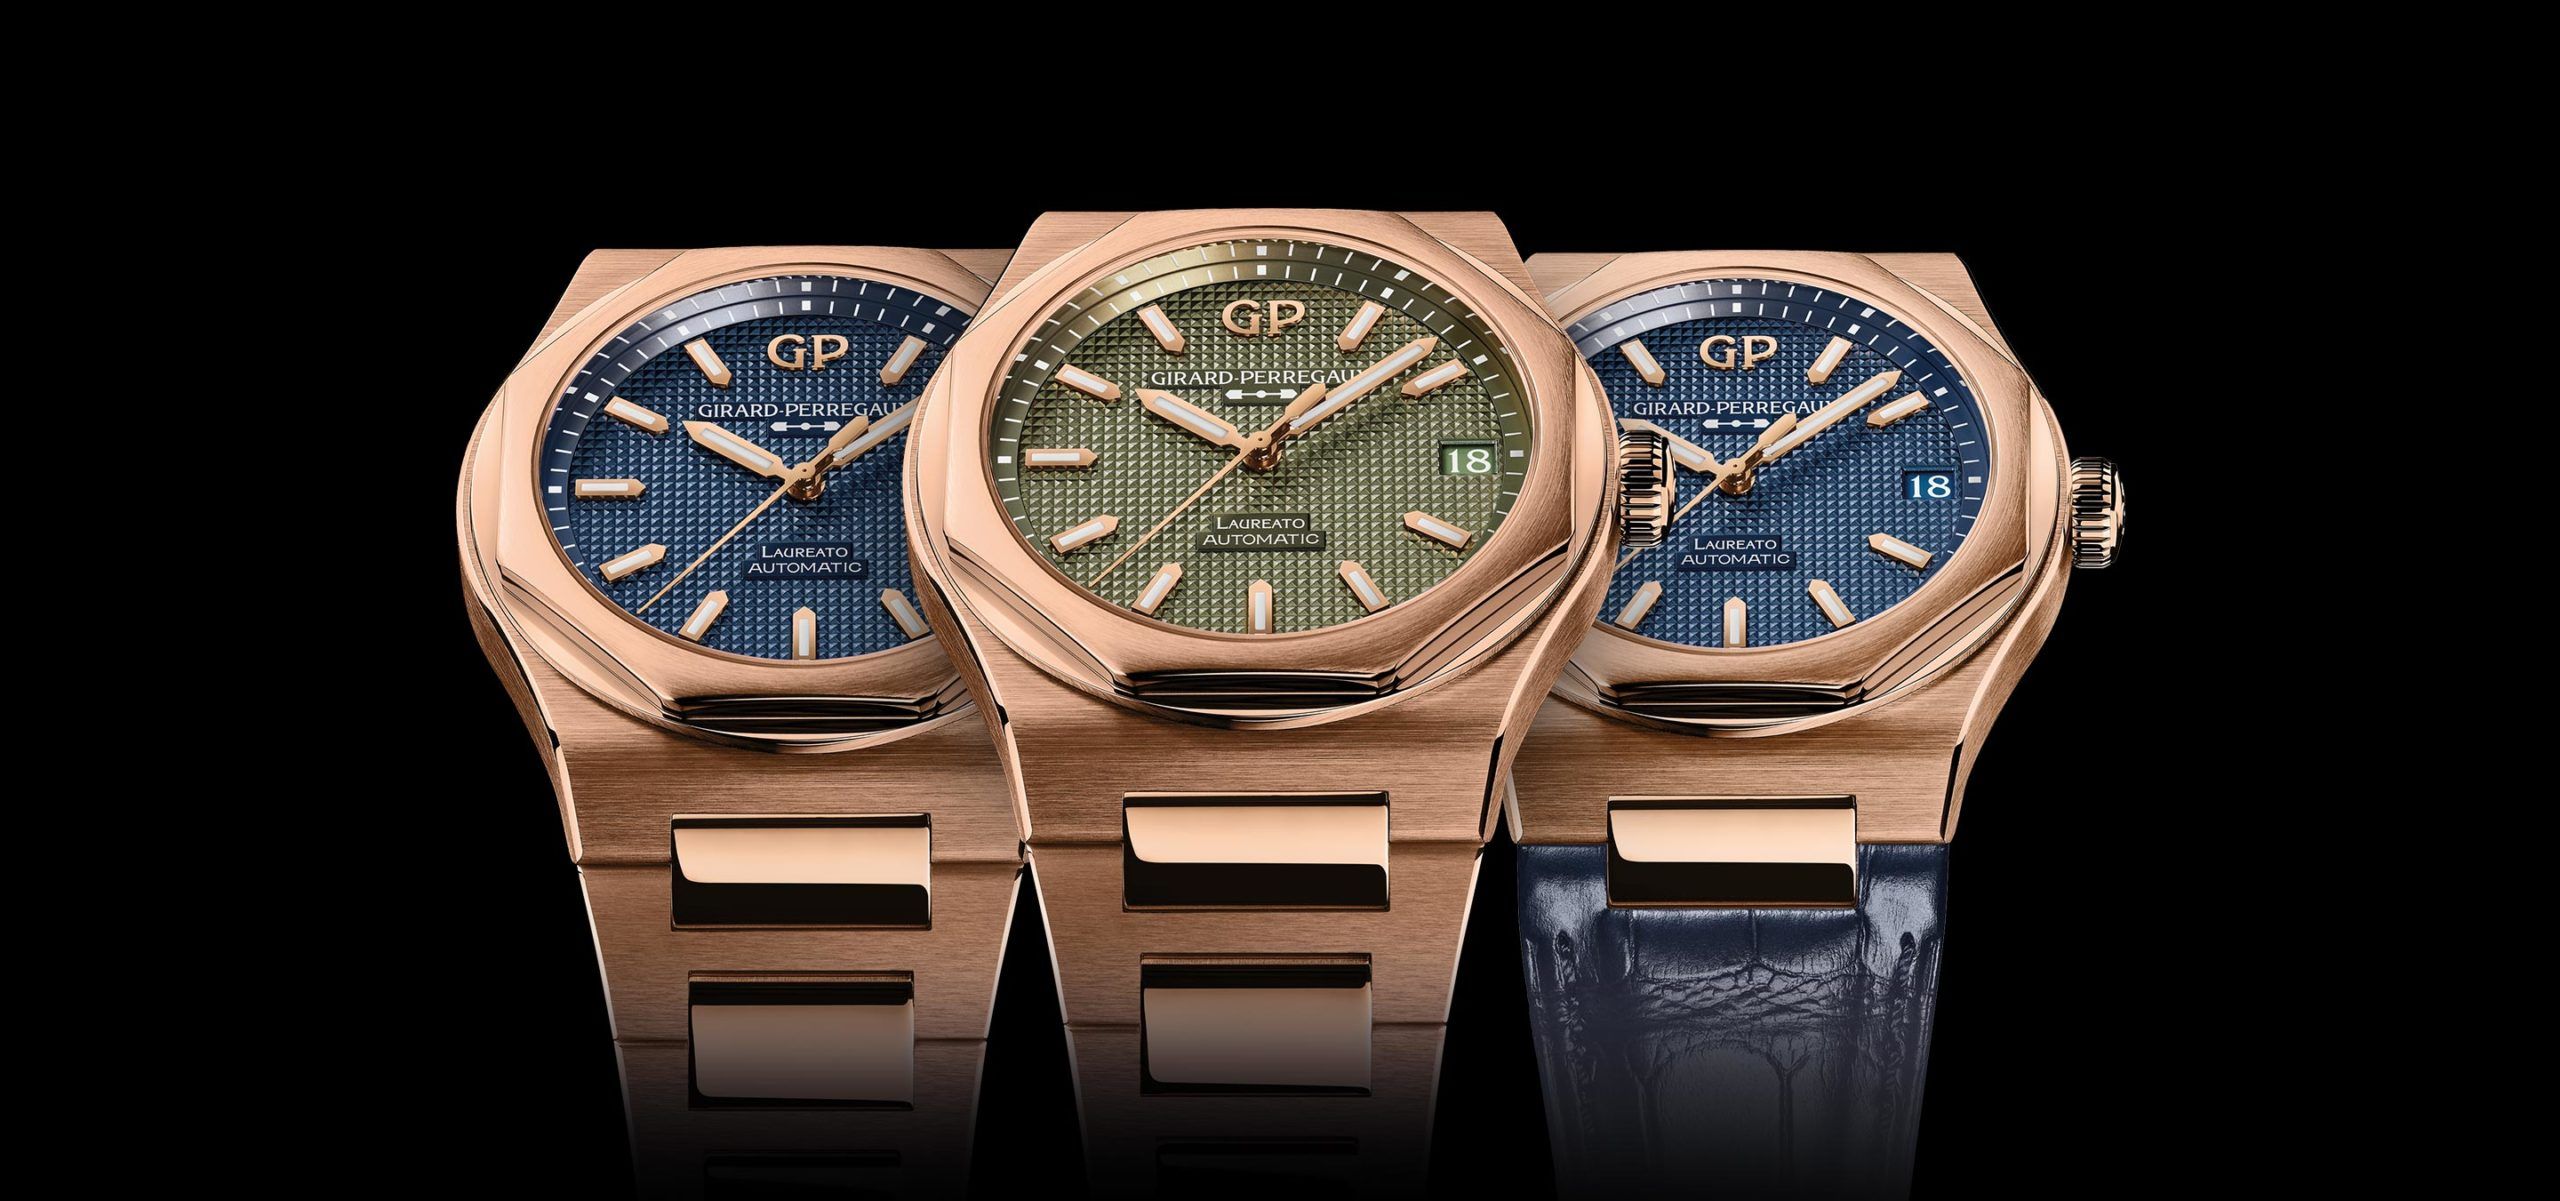 Ultramarine And Sage—The New Dials Of The Pink Gold Girard-Perregaux Laureato